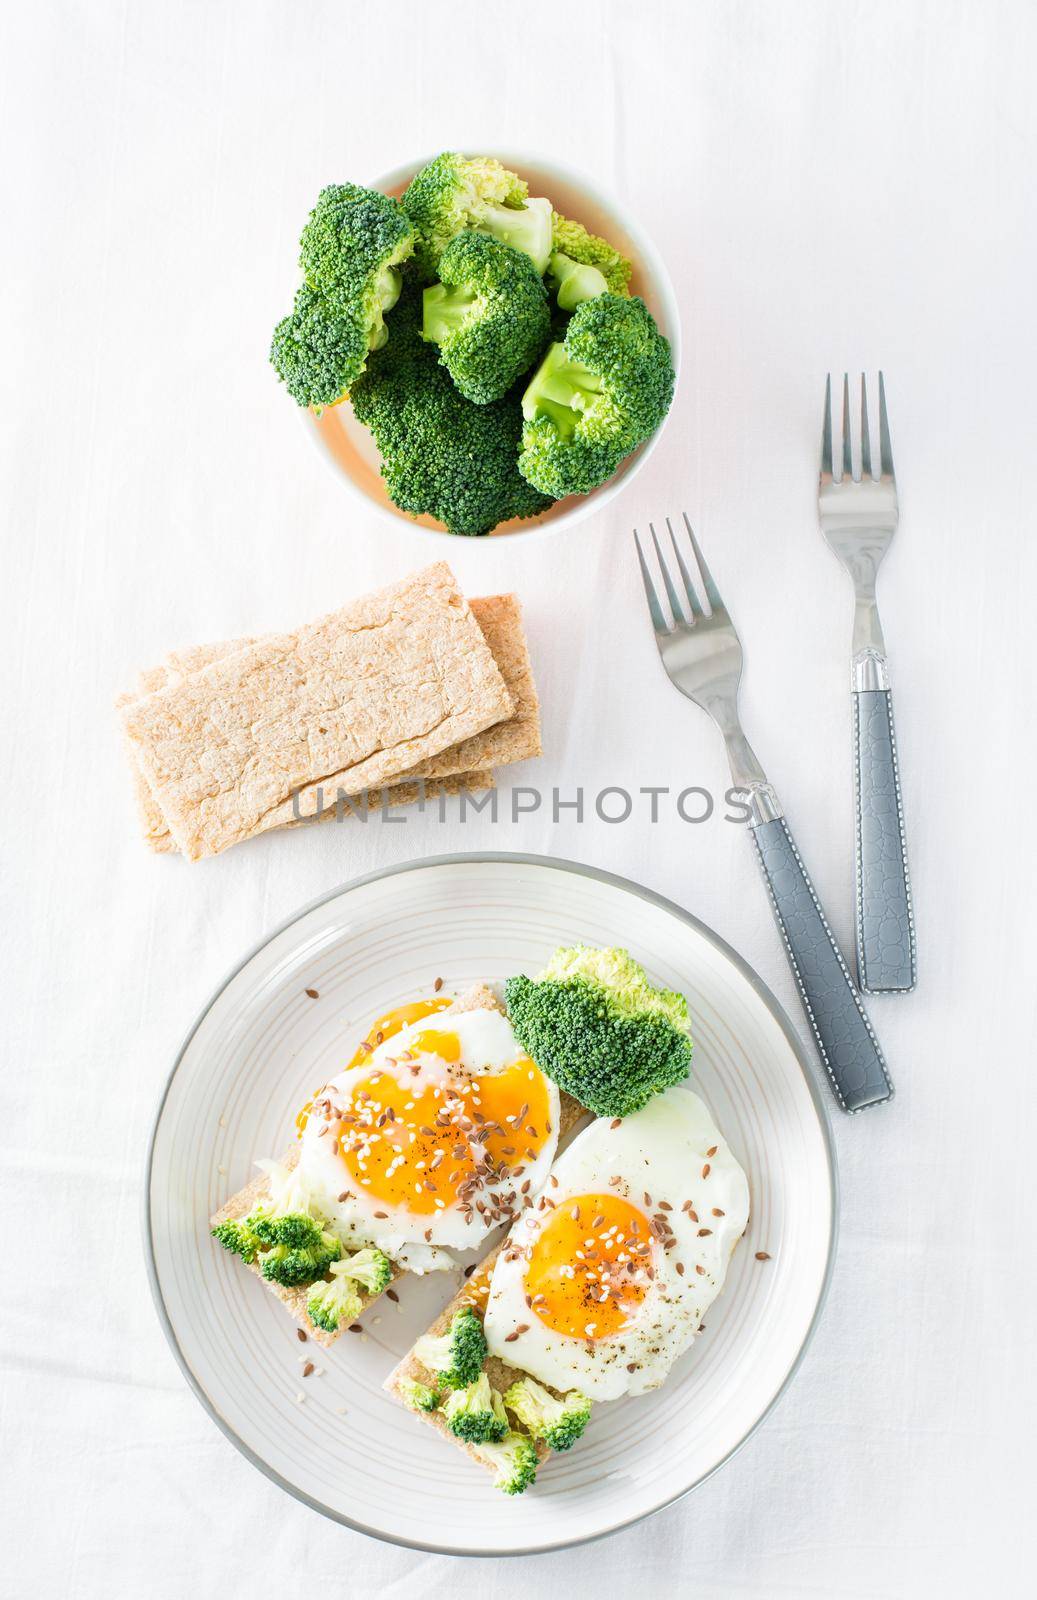 Bruschetta with scrambled eggs and broccoli on a grain crispbread with sesame seeds and flaxseed on a plate on the table. Top view. Vertical view